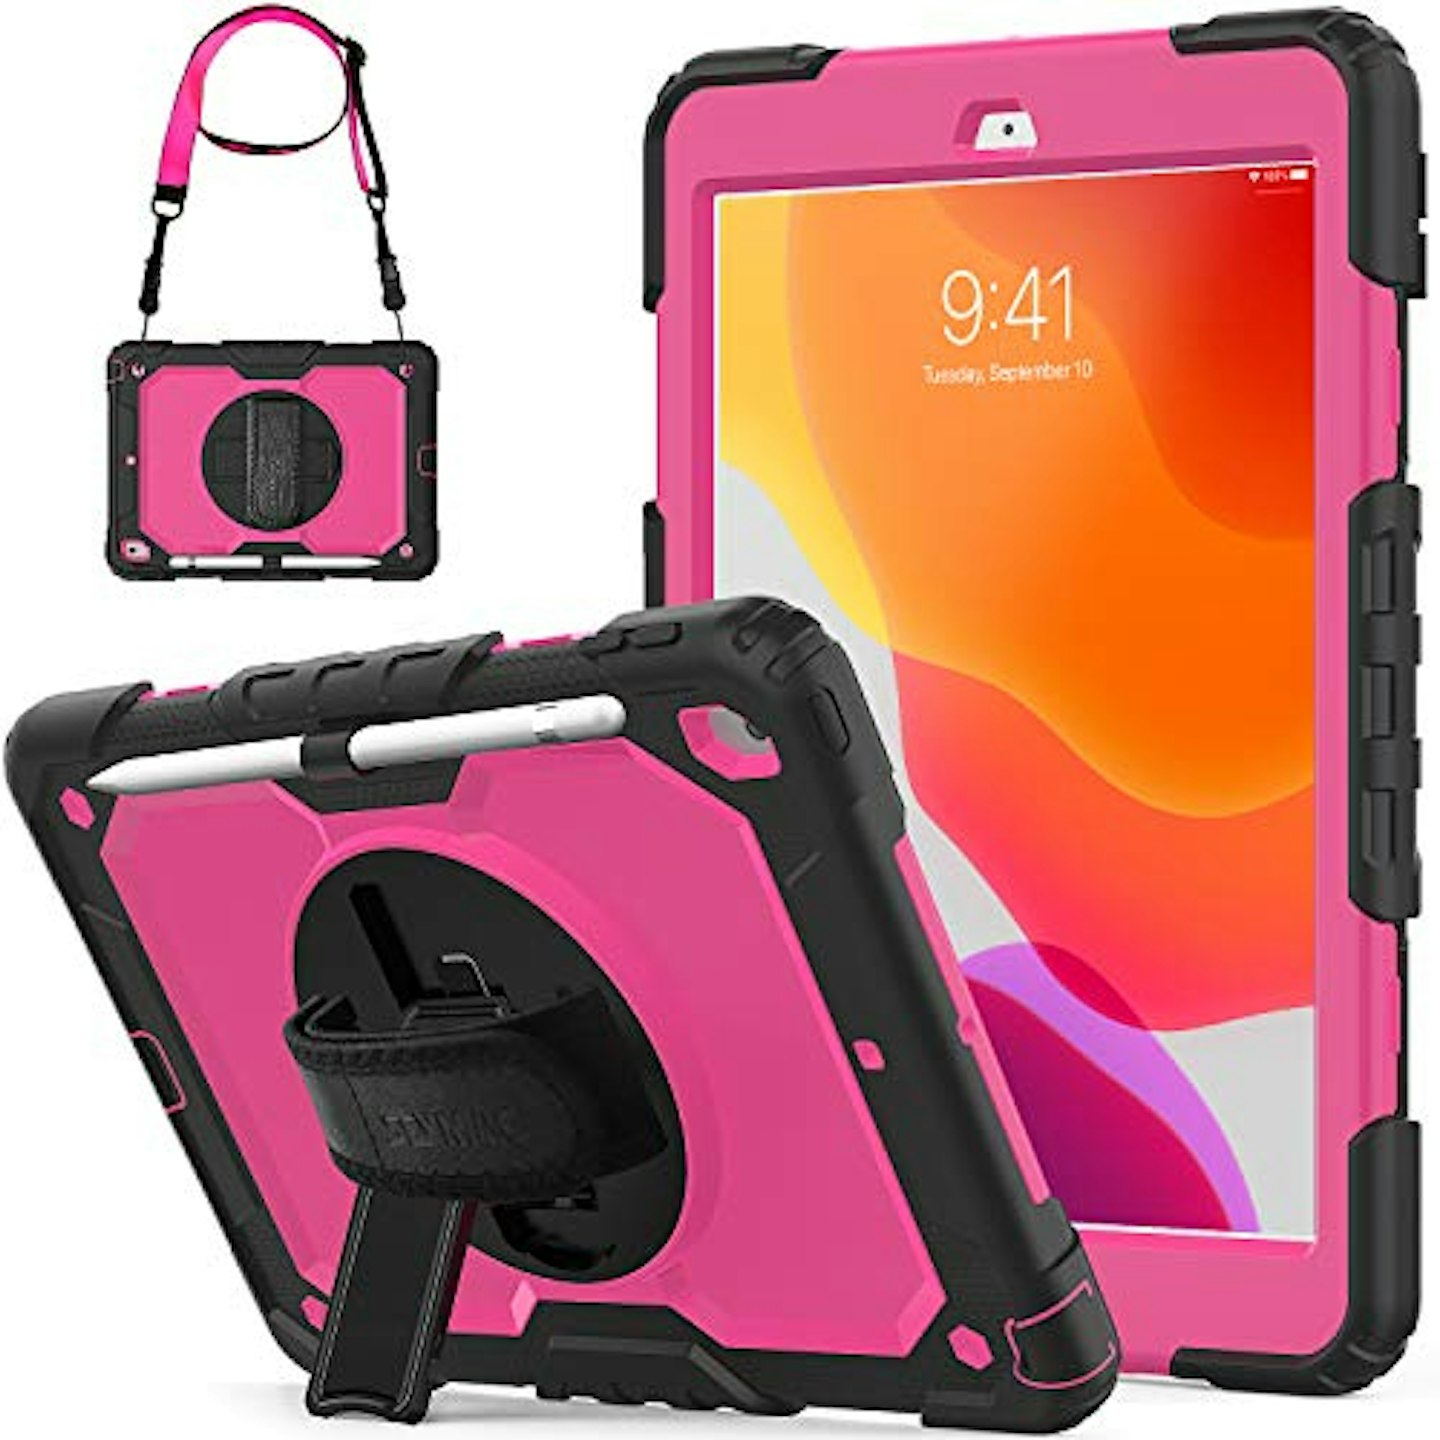 Best iPad Cases for Kids in 2020: Shockproof & Childproof Protection